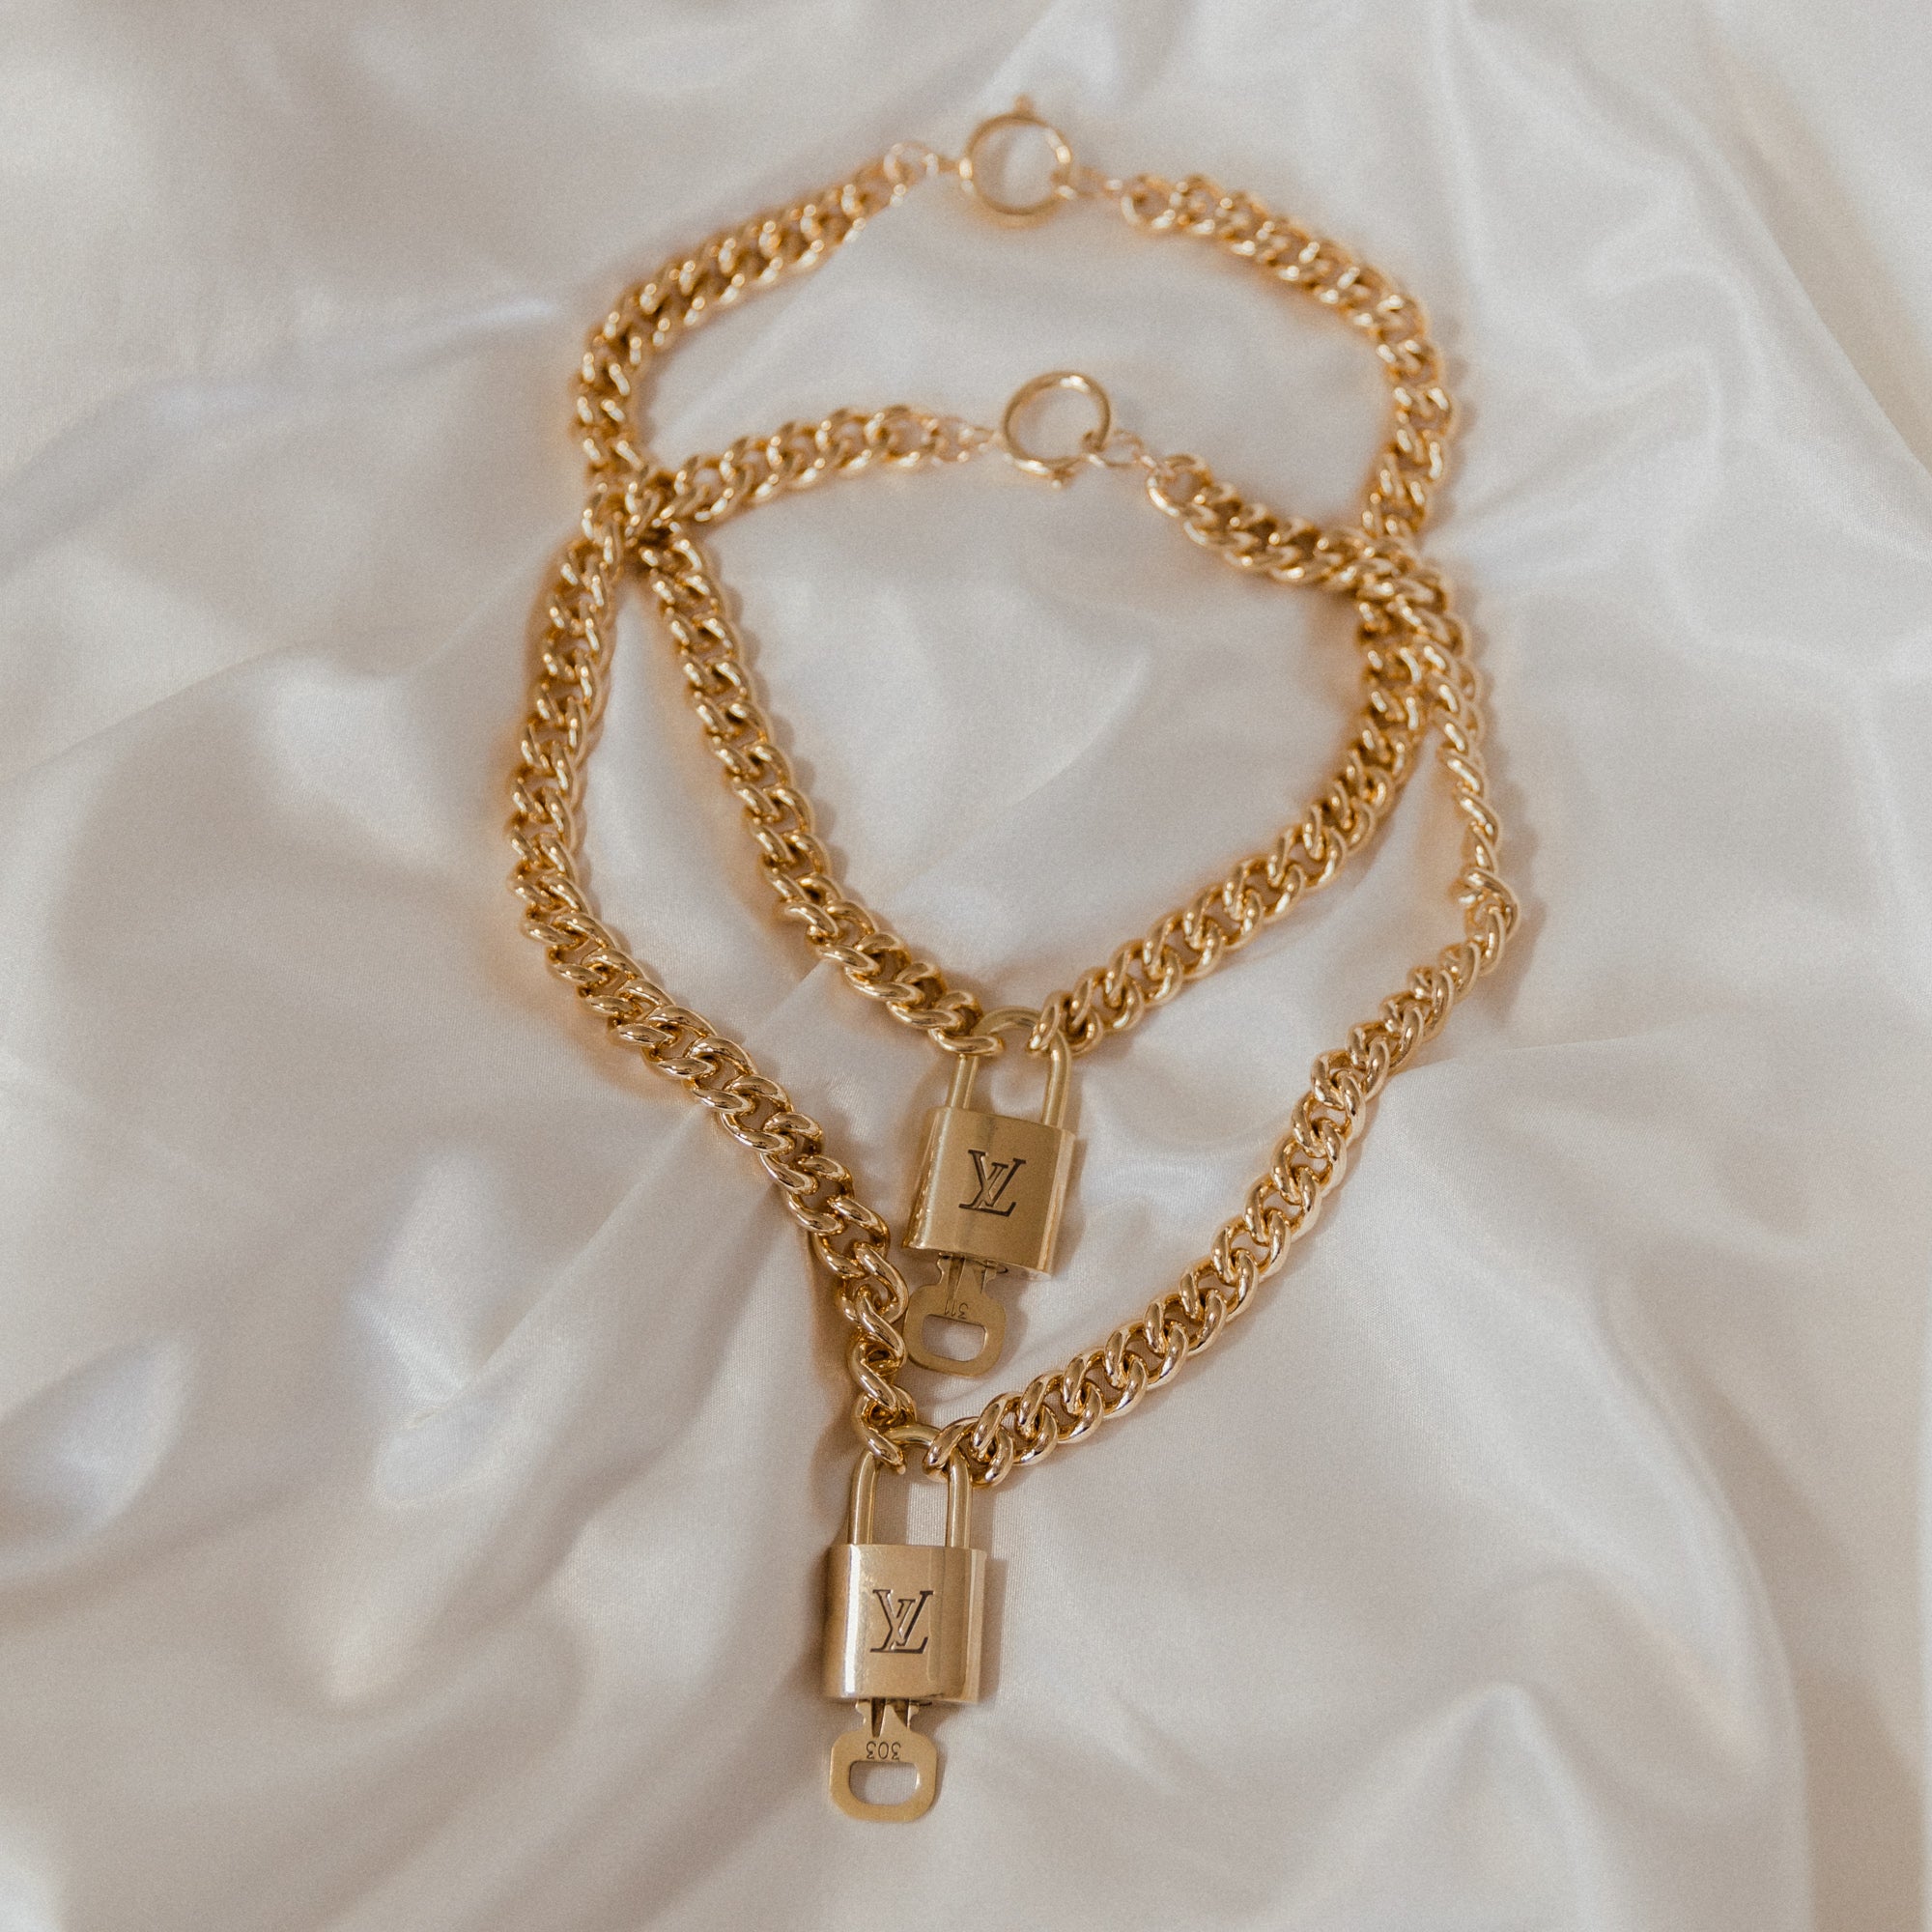 Vintage Louis Vuitton Lock Necklace 2 from Erin Fader Jewelry